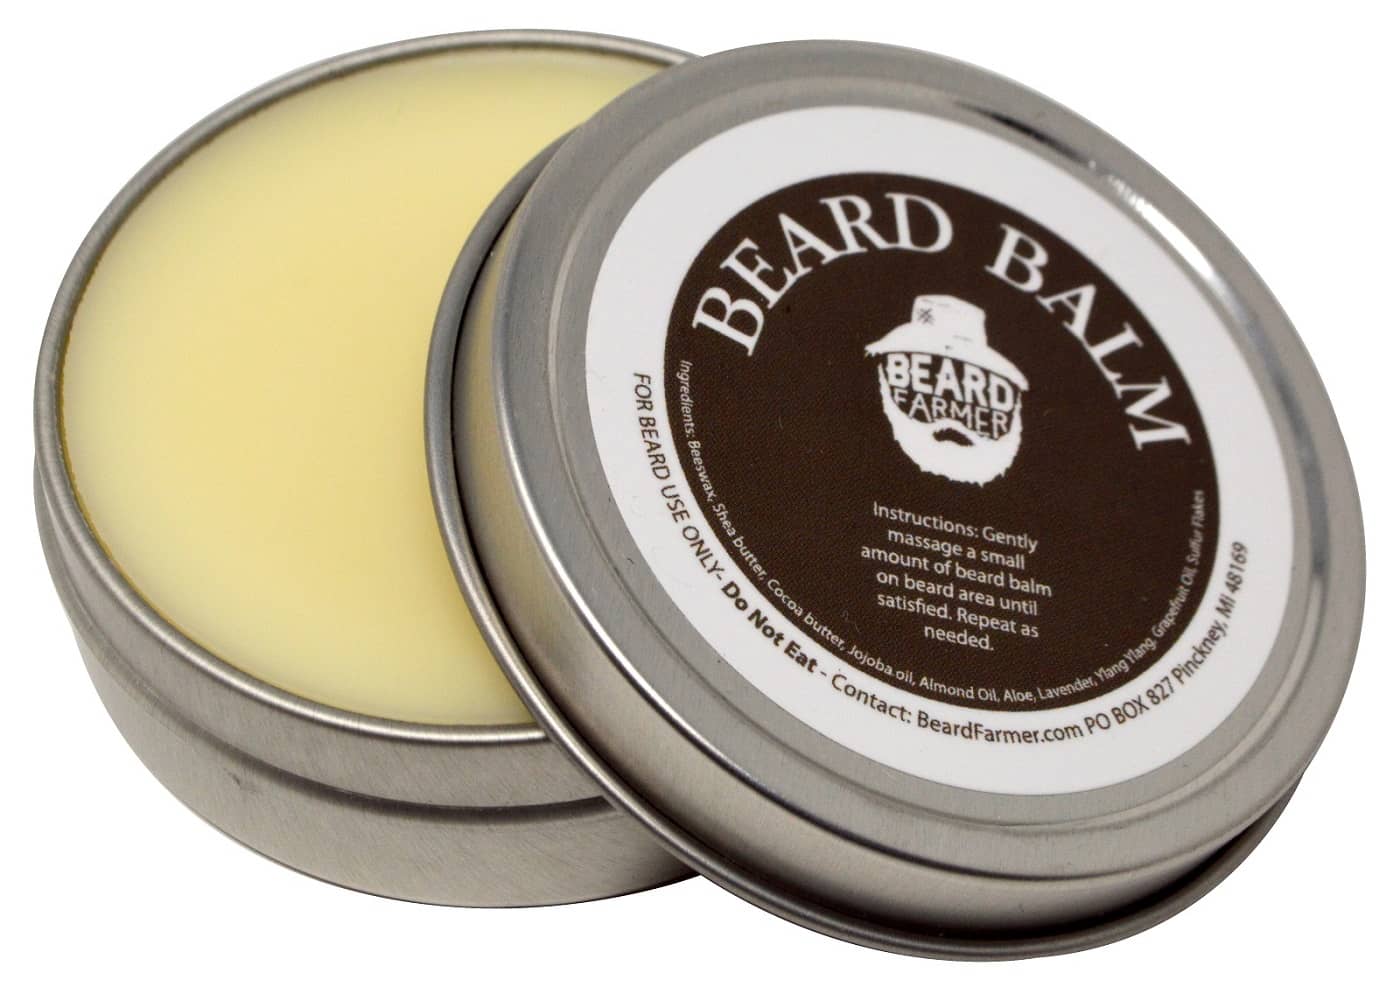 Uber Soft Beard Balm – Softner All-in-one (For Beard Growth, Moisturizing, and Conditioning) 1.9oz